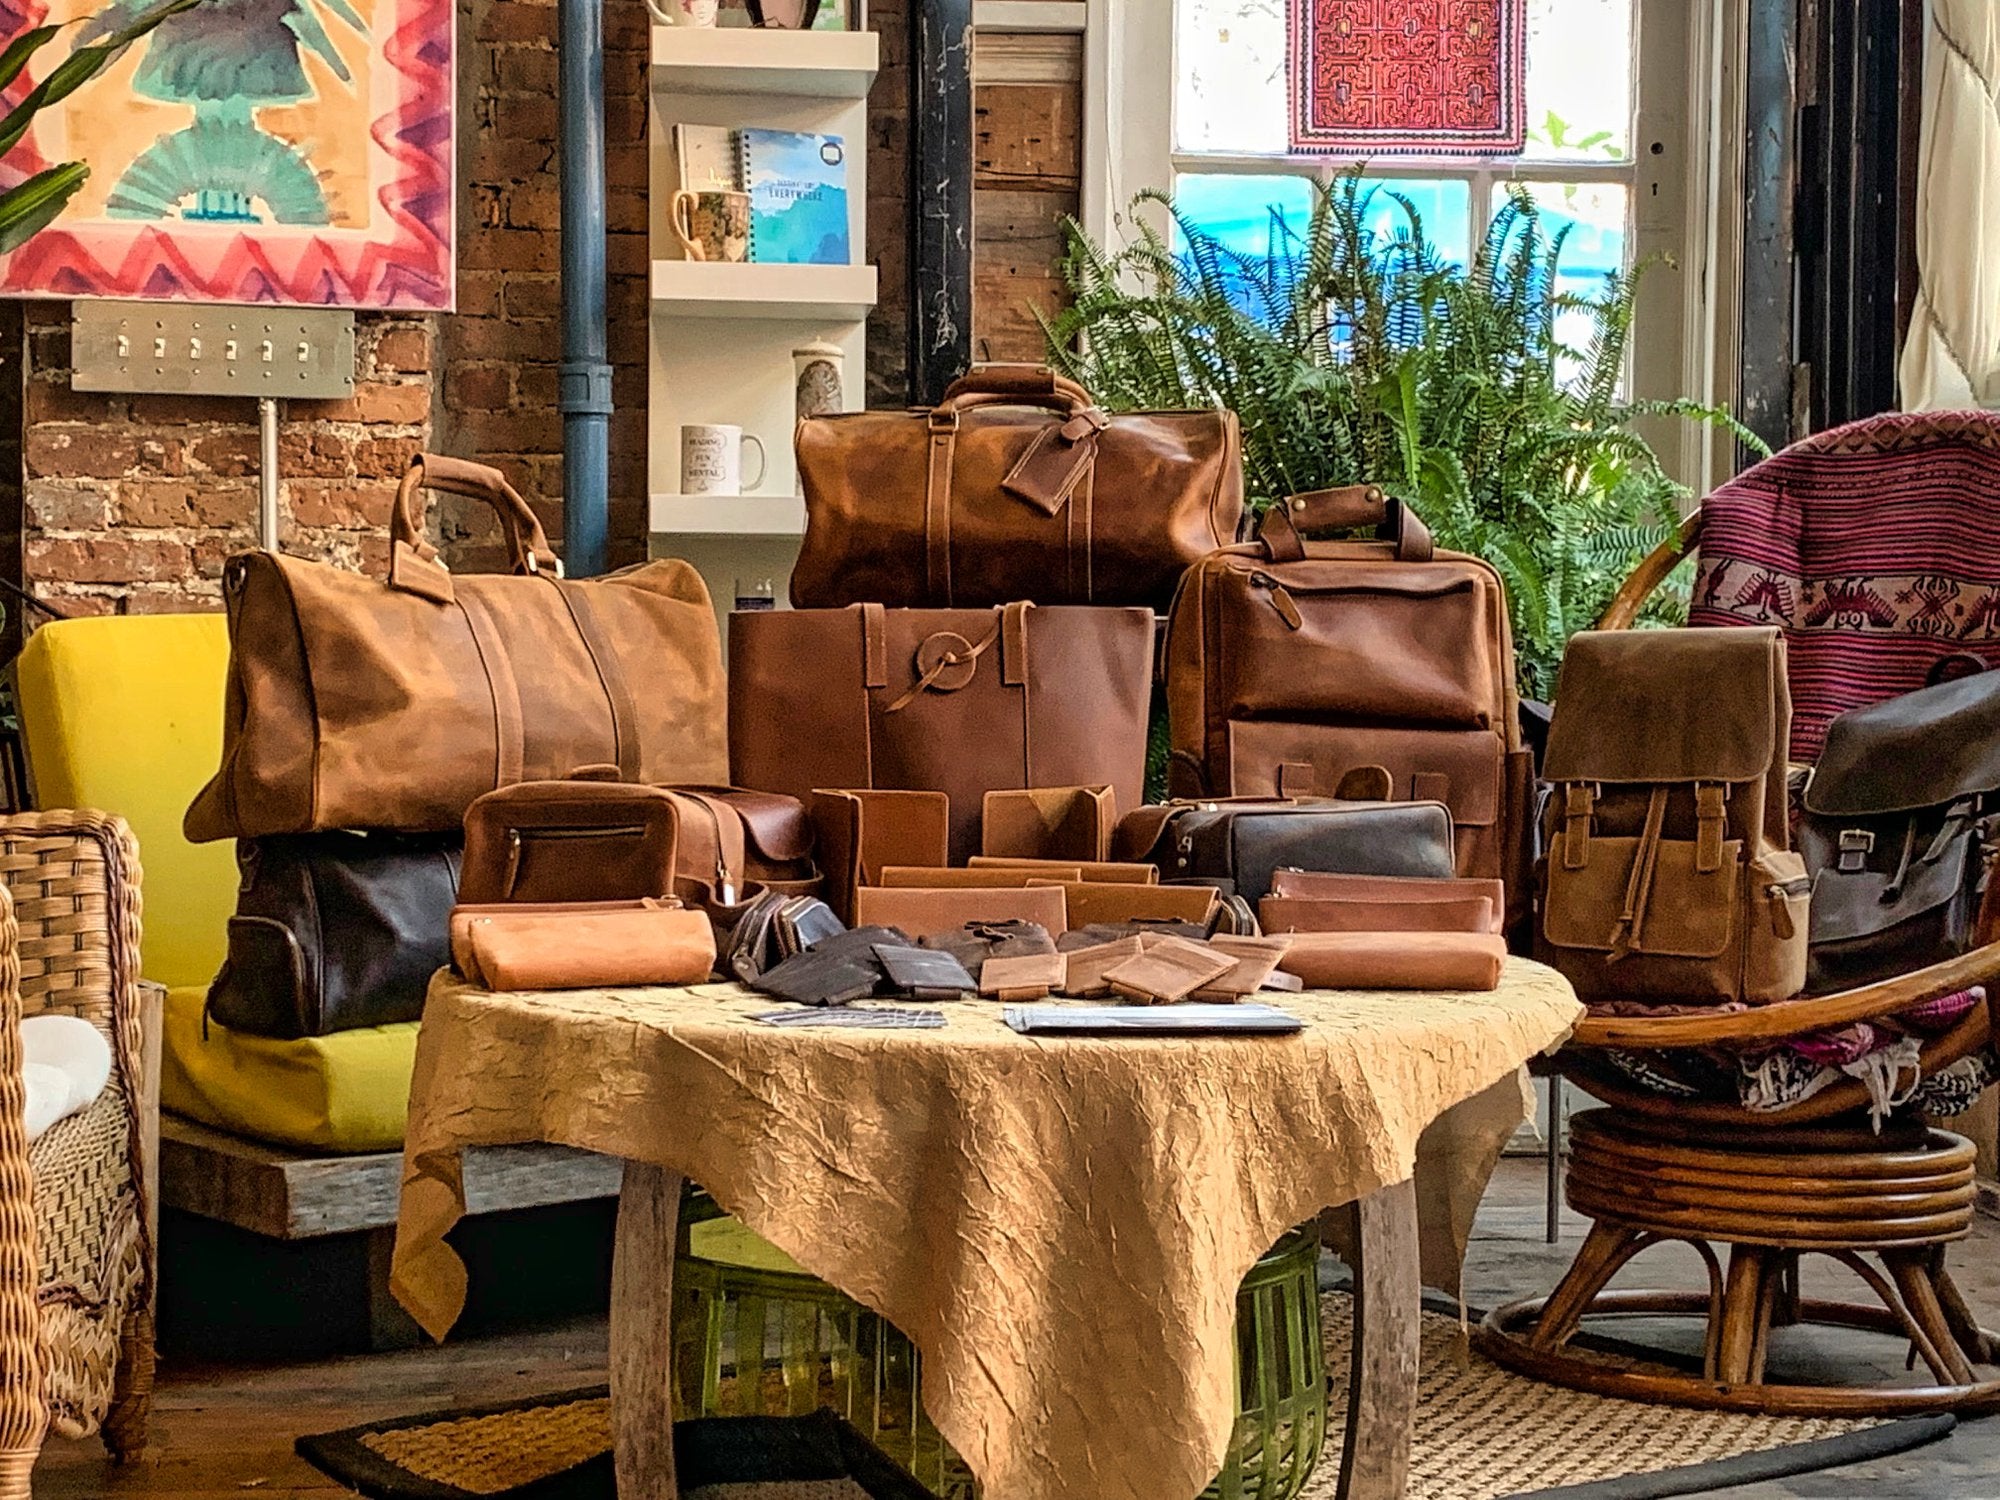 Bags For Groomsmen Gifts That They Won’t Forget